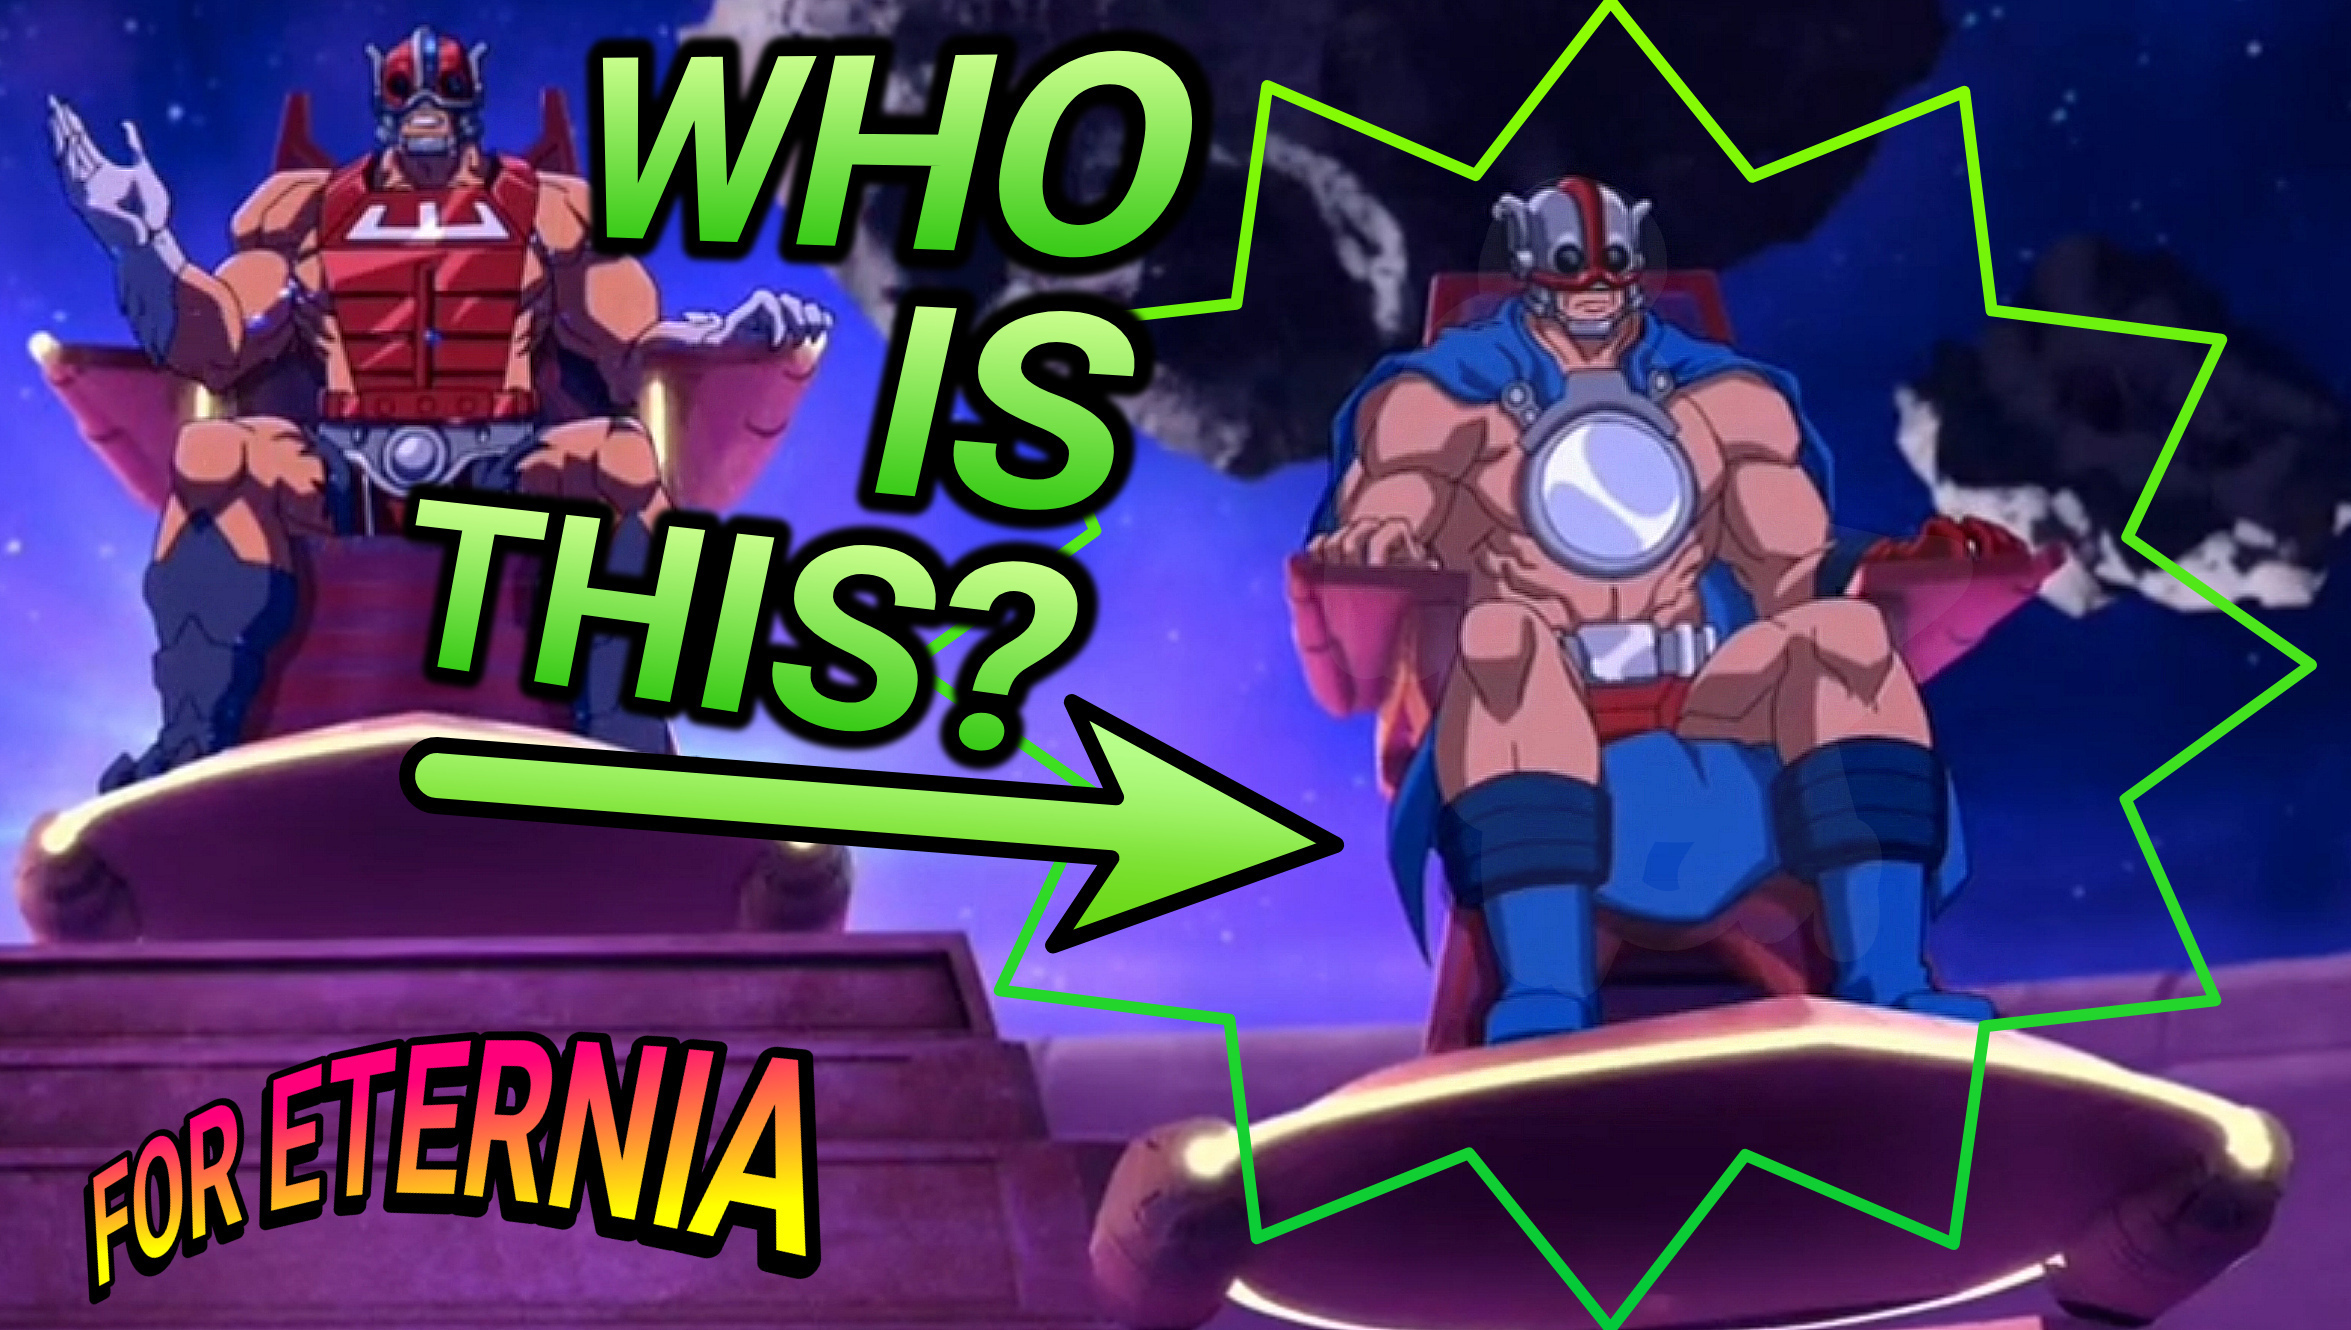 Who is sitting on Zodac’s left in ”Masters of the Universe: Revolution”?